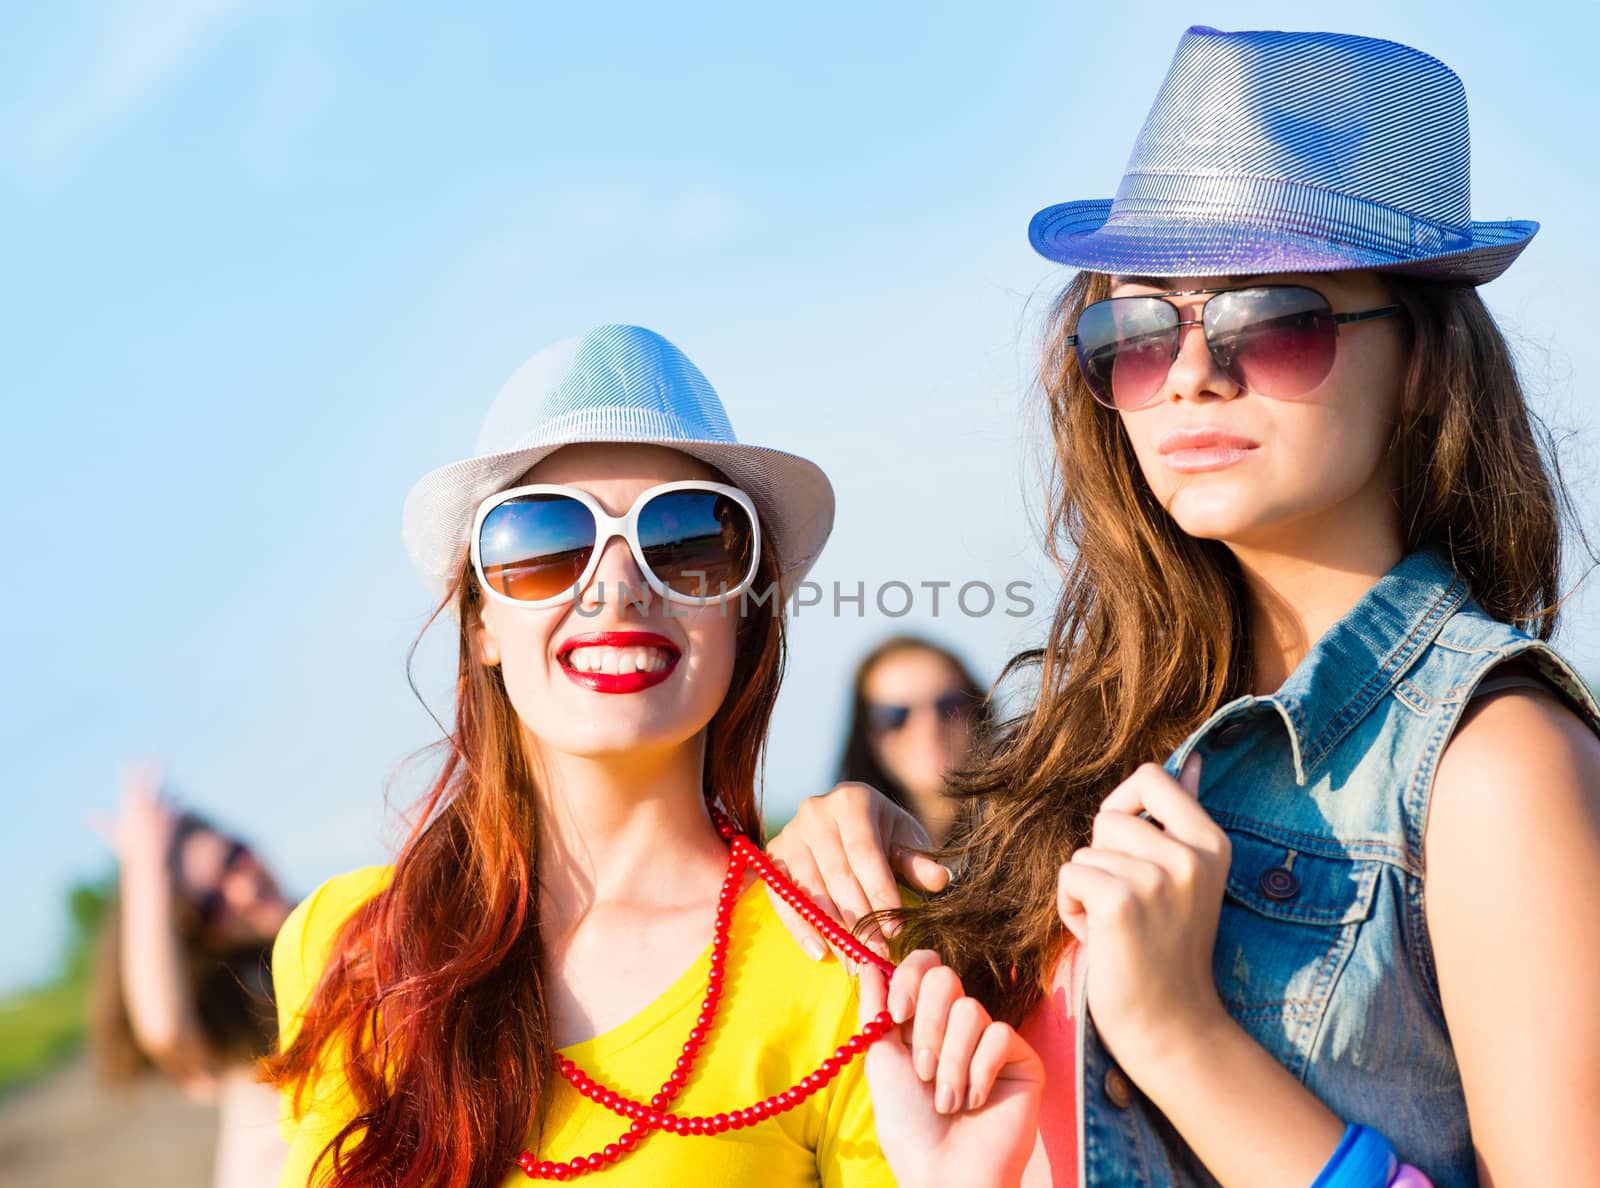 Two young girlfriends having fun on the background of blue sky and friends